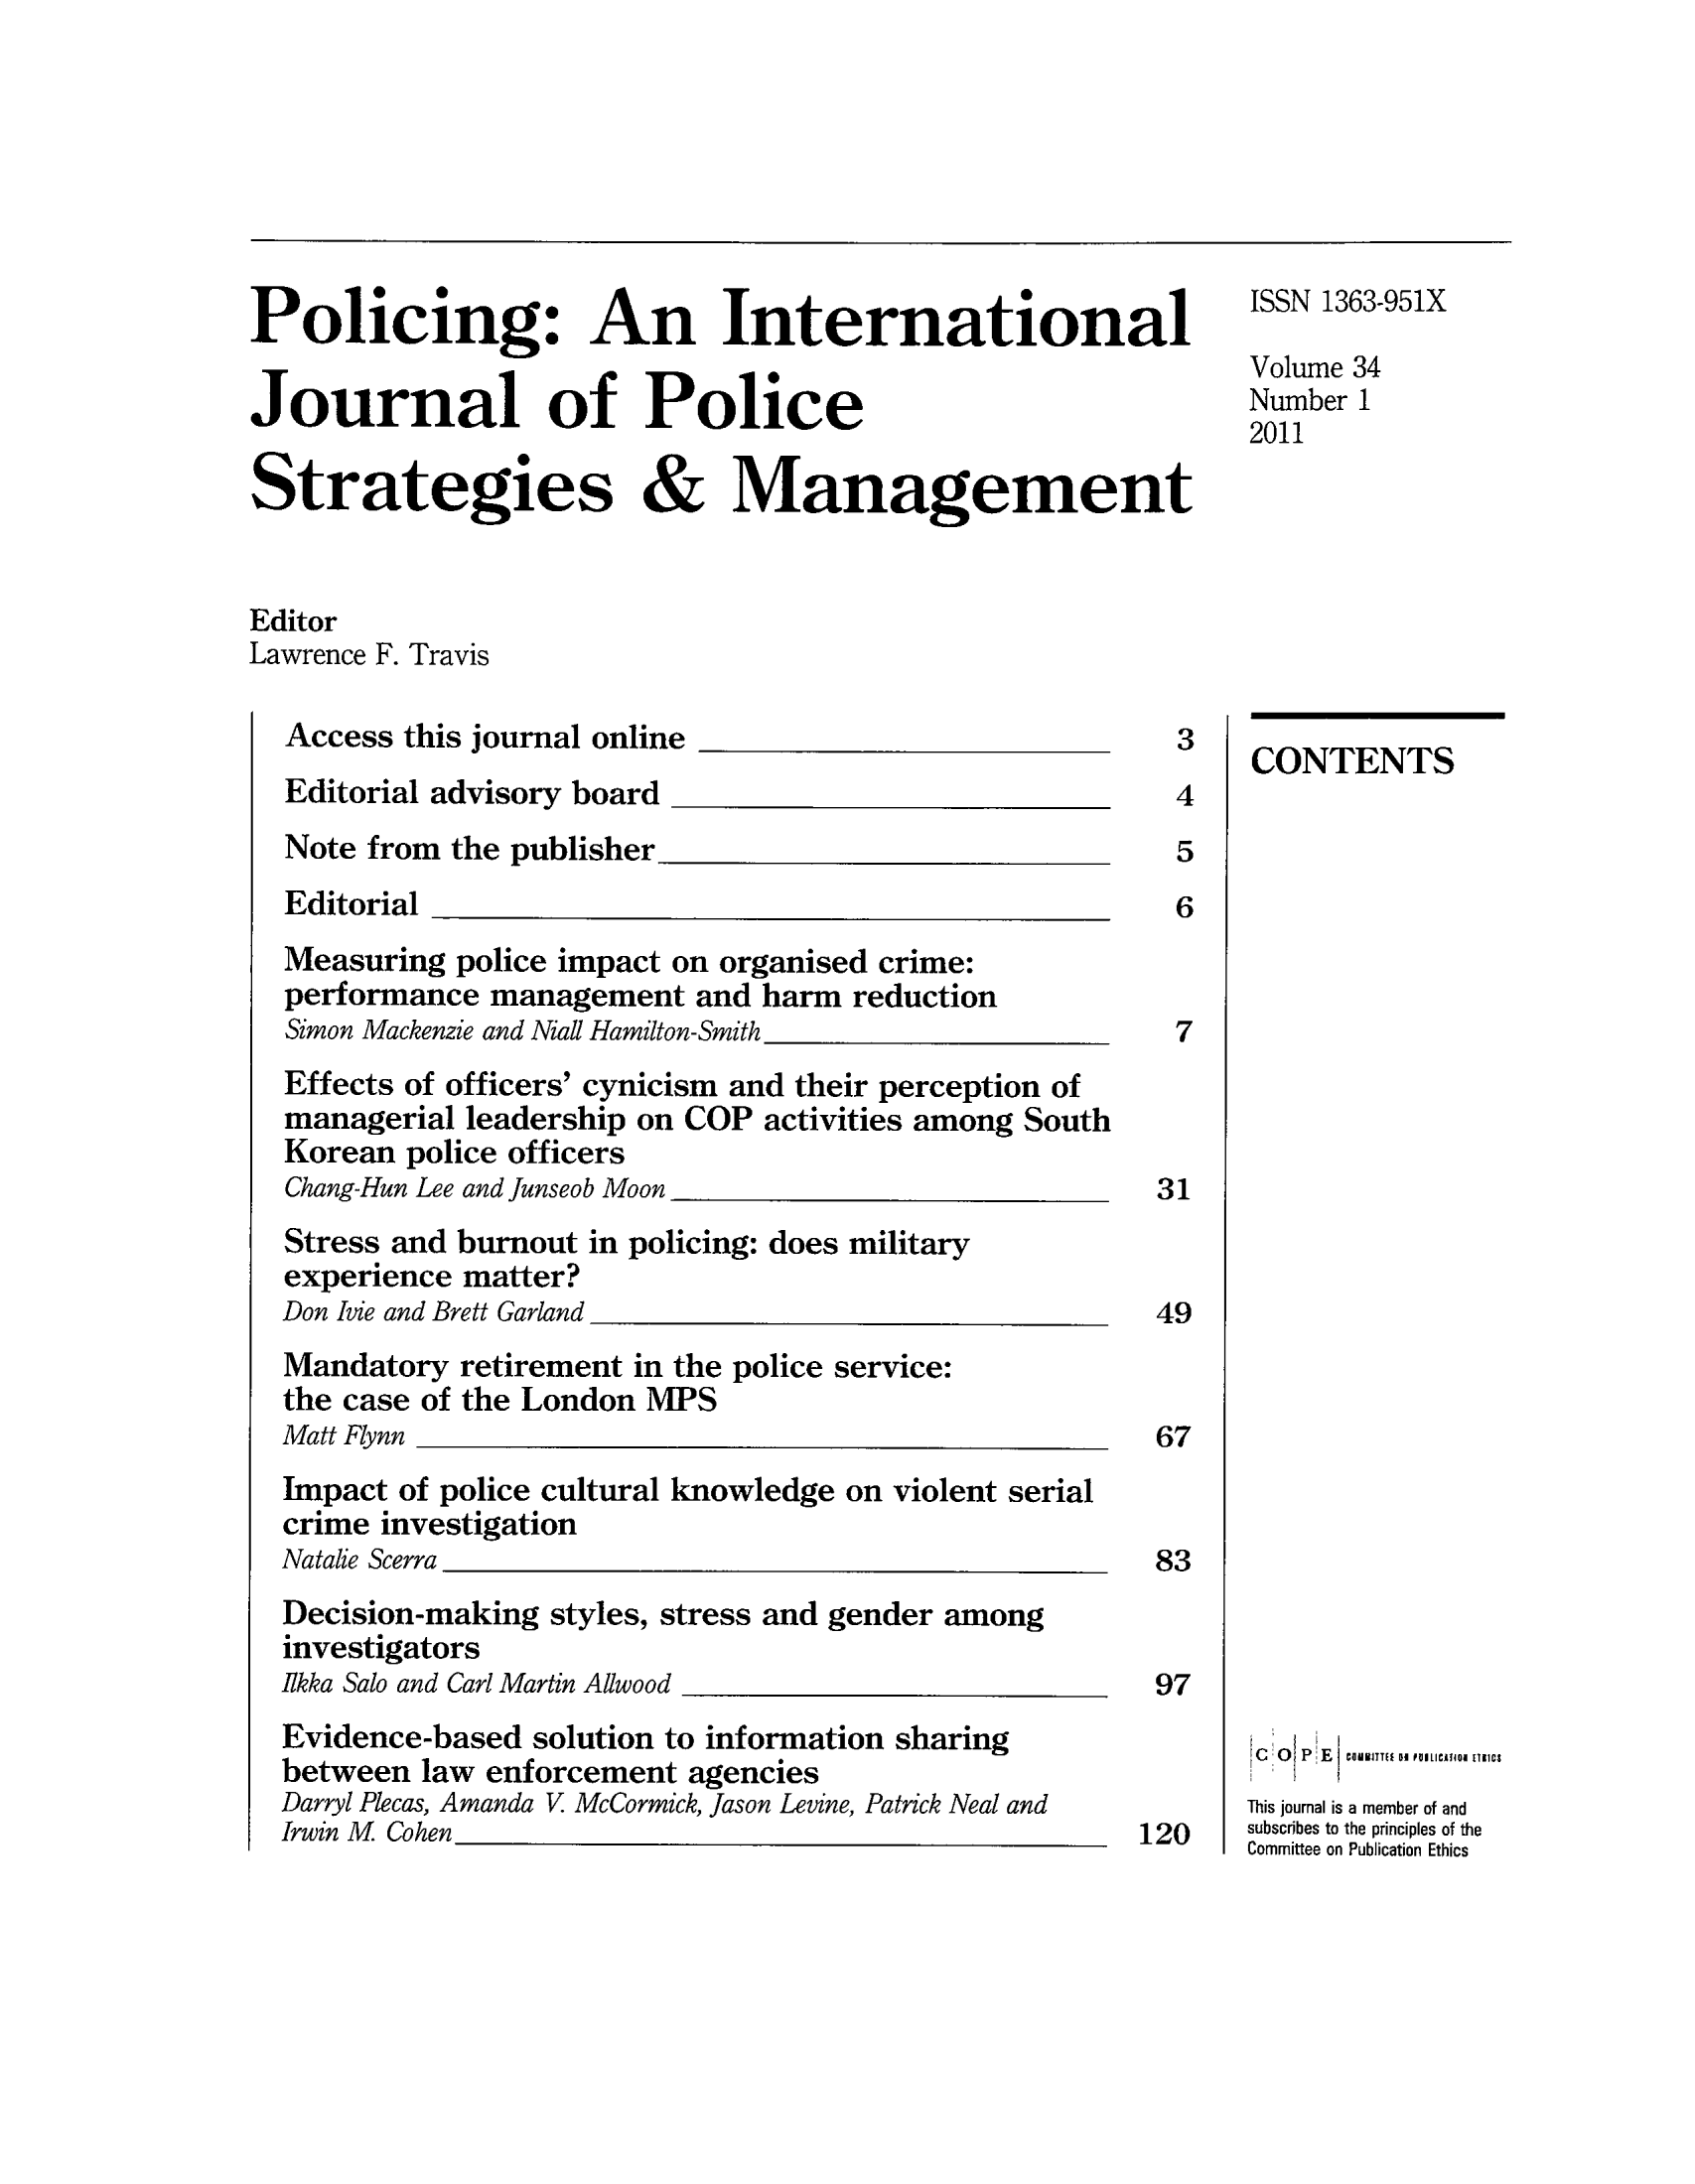 handle is hein.journals/polic34 and id is 1 raw text is: Policing: An International                                 IN1363-951X
Poic ng                0io                        Volume 34
Journal of Police                                        Number 1
2011
Strategies & Management
Editor
Lawrence F. Travis
Access this journal online_                        3
Editorial advisory board                           4
Note from the publisher5
Editorial                                          6
Measuring police impact on organised crime:
performance management and harm reduction
Simon Mackenzie and Nial Hamilton-Smith_7
Effects of officers' cynicism and their perception of
managerial leadership on COP activities among South
Korean police officers
Chang-Hun Lee and junseob Moon                    31
Stress and burnout in policing: does military
experience matter?
Don 1vie and Brett Garland_49
Mandatory retirement in the police service:
the case of the London MIPS
Matt Flynn                                        67
Impact of police cultural knowledge on violent serial
crime investigation
Natalie Scerra                                    83
Decision-making styles, stress and gender among
investigators
Ikka Salo and Carl Martin Allwood                 97
Evidence-based solution to information sharing  ~  ~   ~    ECulfh
between law enforcement agencies
Darryl Plecas, Amanda V McCormick, Jason Levine, Patrick Neal andThsjunliamebroad
IrwinM  Cohn ___________________________________________________subscribes__ 120osbscrbesrtithe princples ftth


